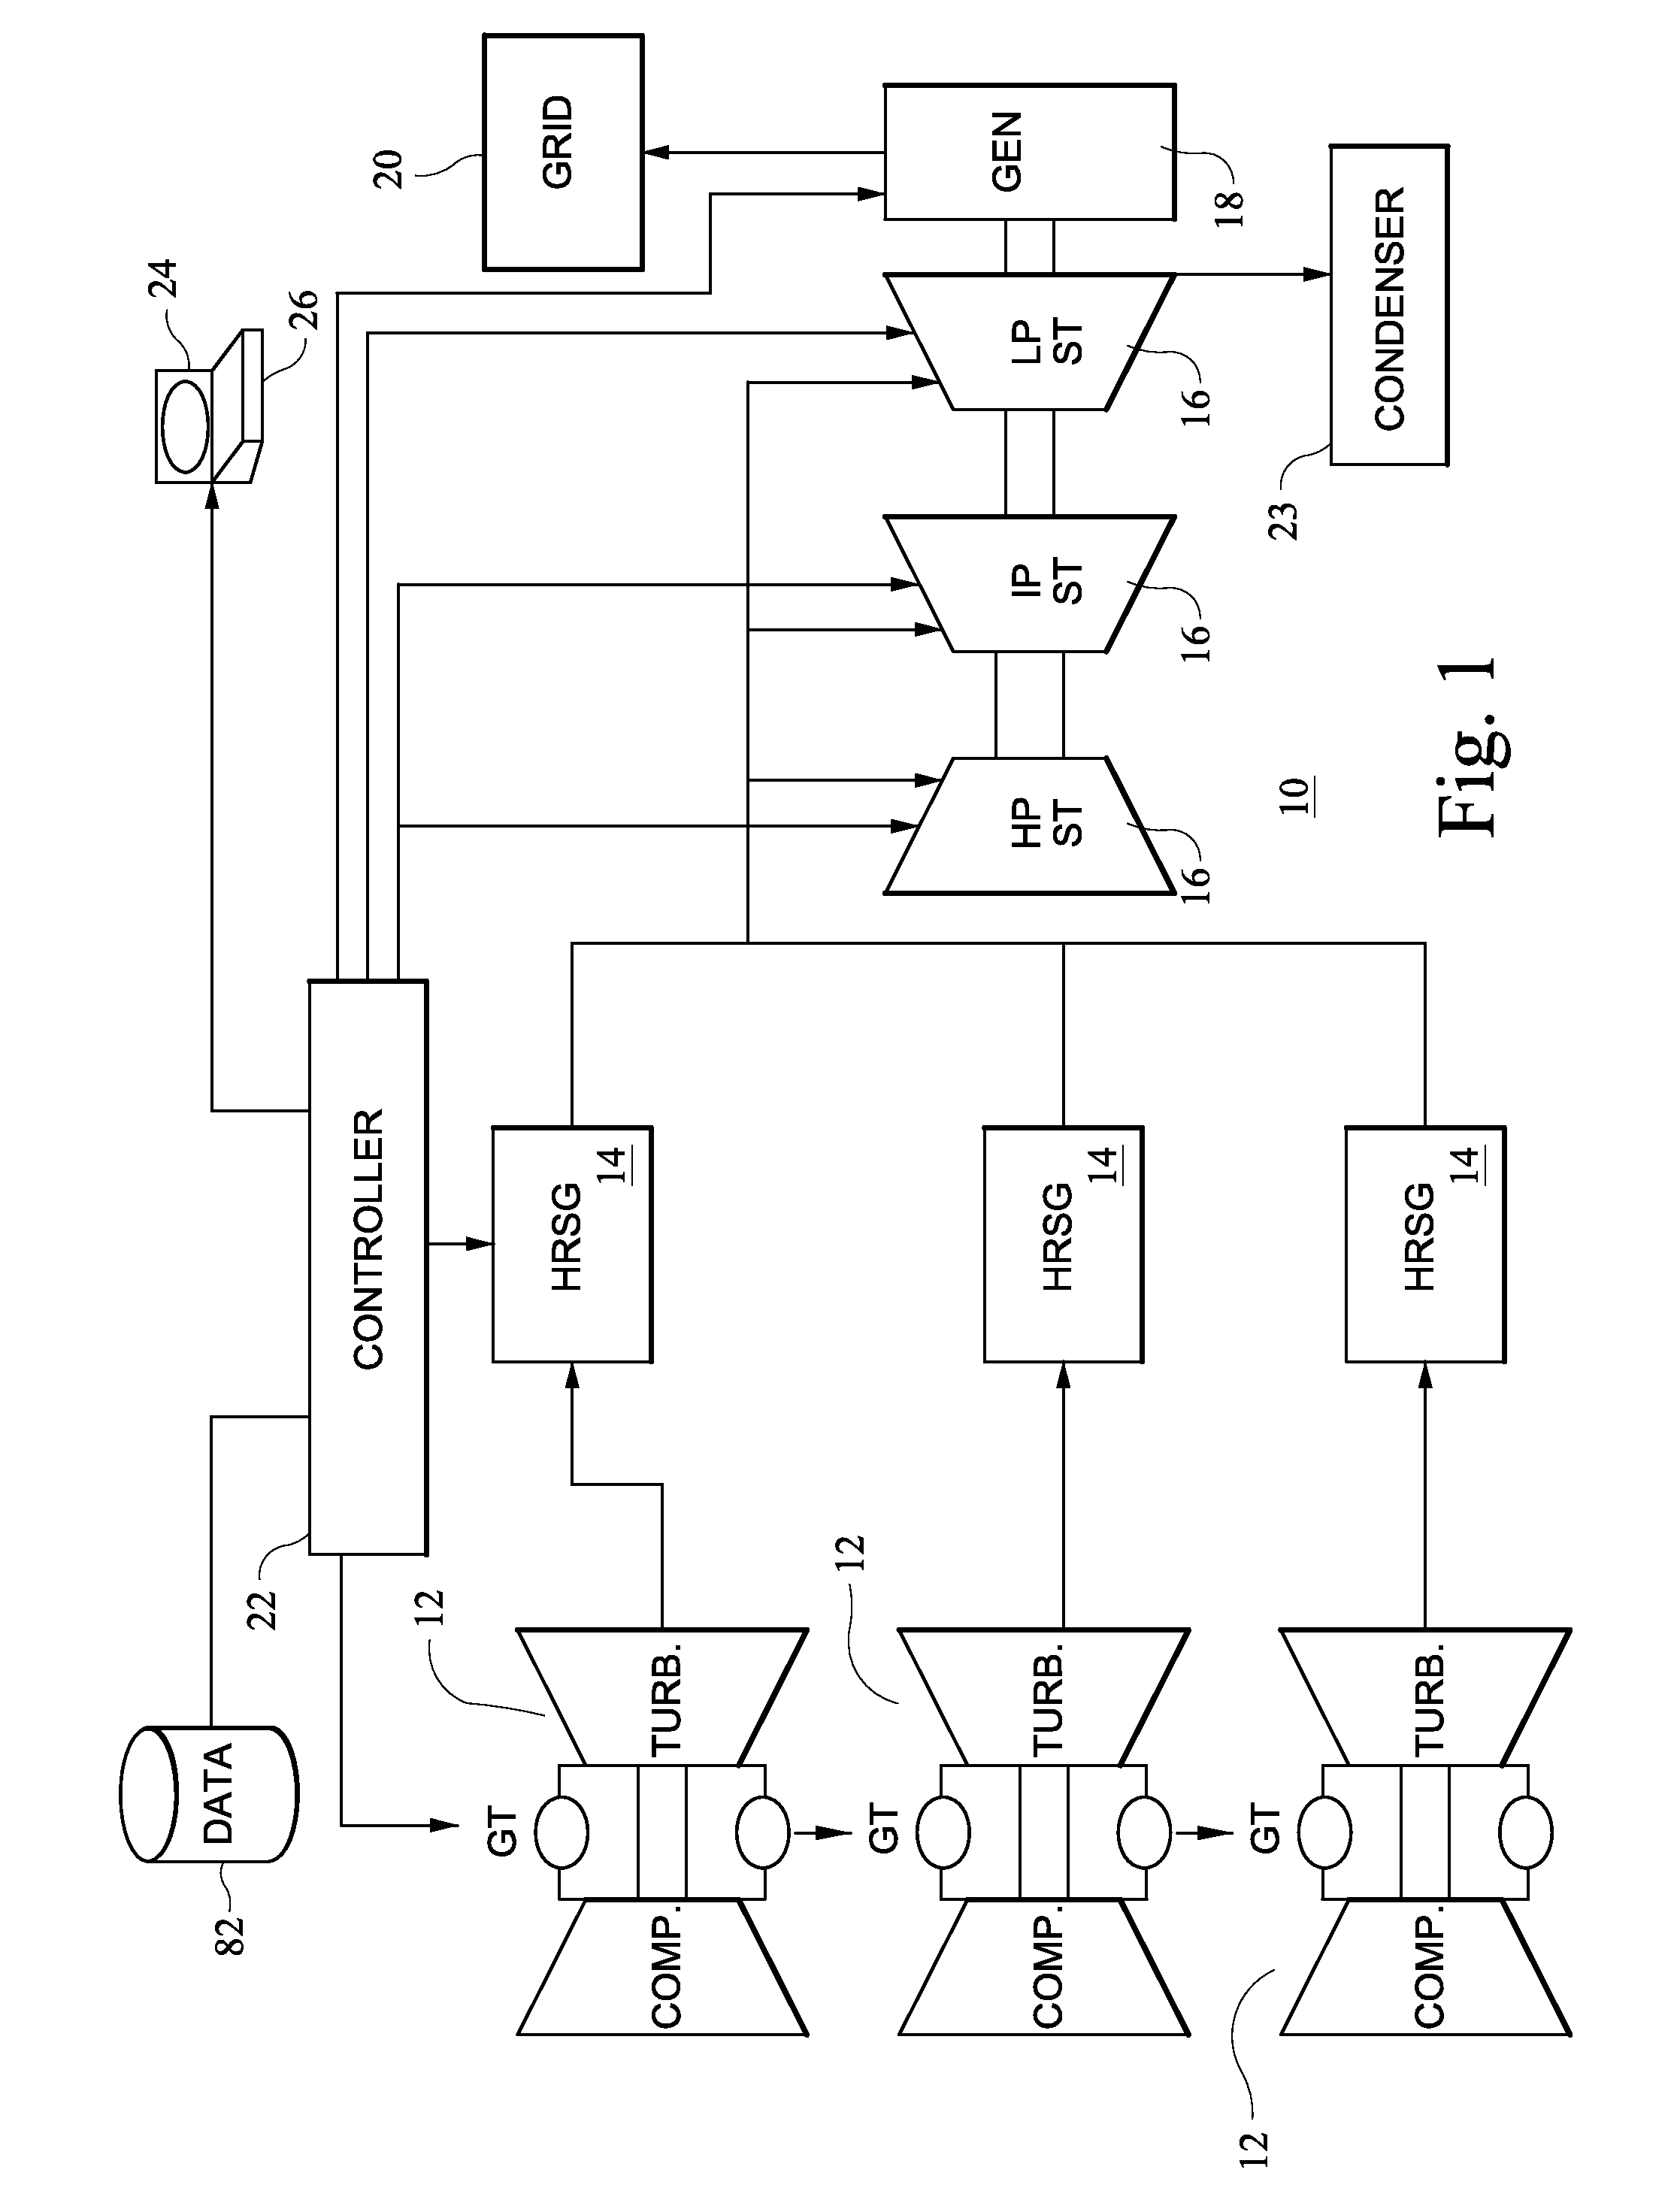 System and method for scheduling startup of a combined cycle power generation system